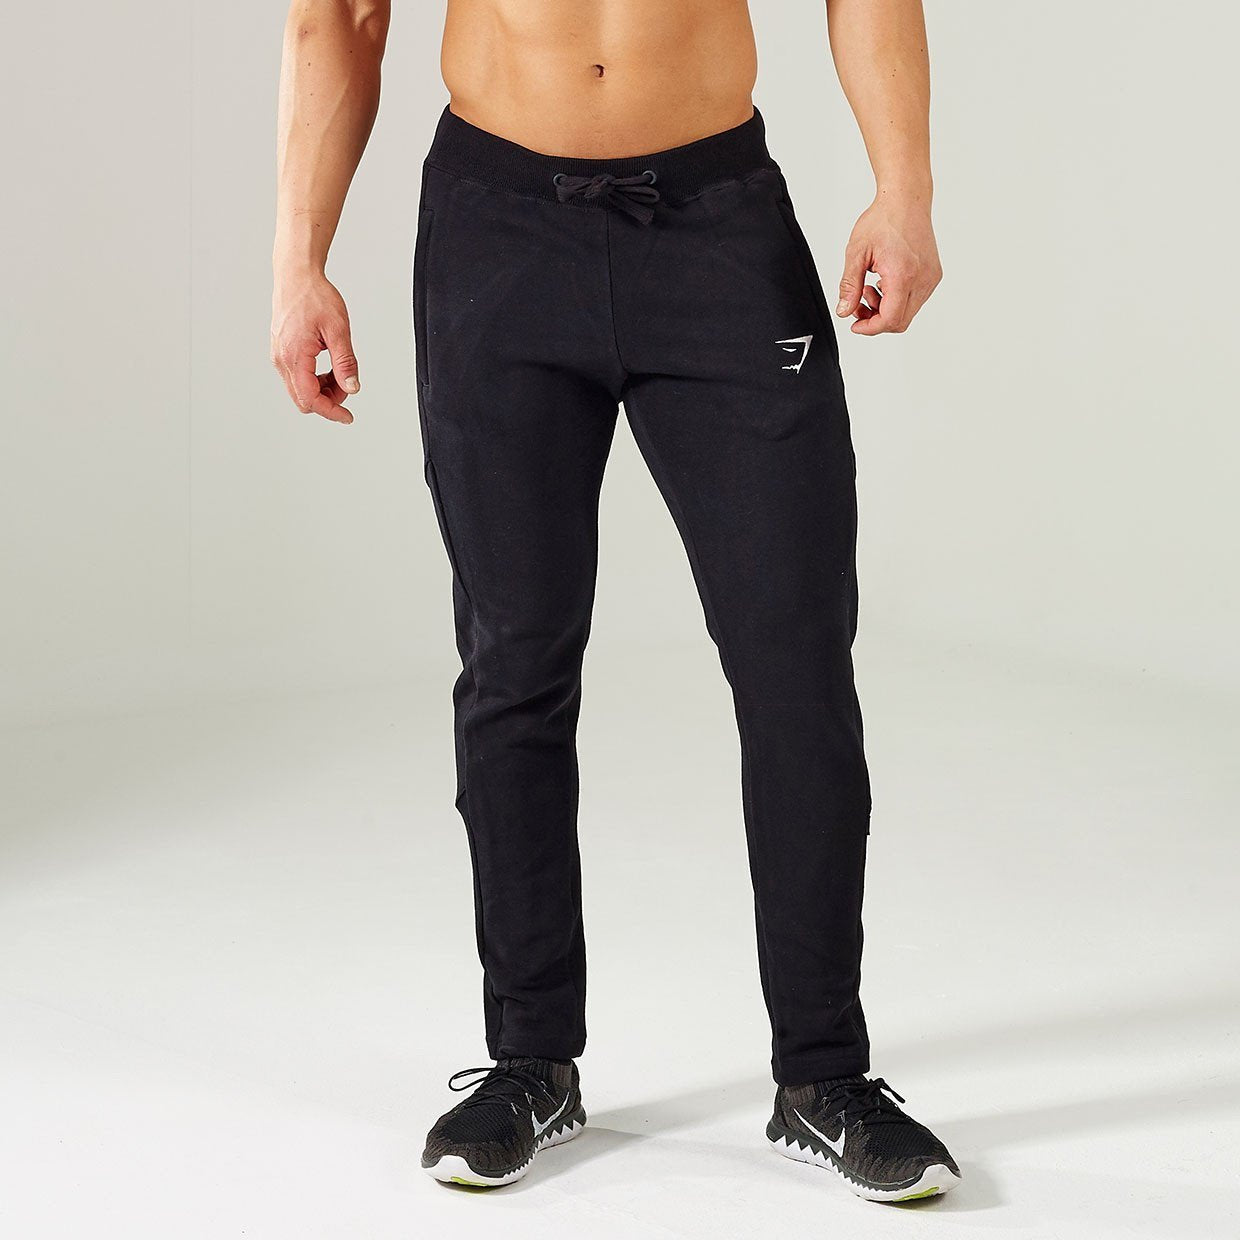 Pioneer Tapered Bottoms V1 in Black - view 4